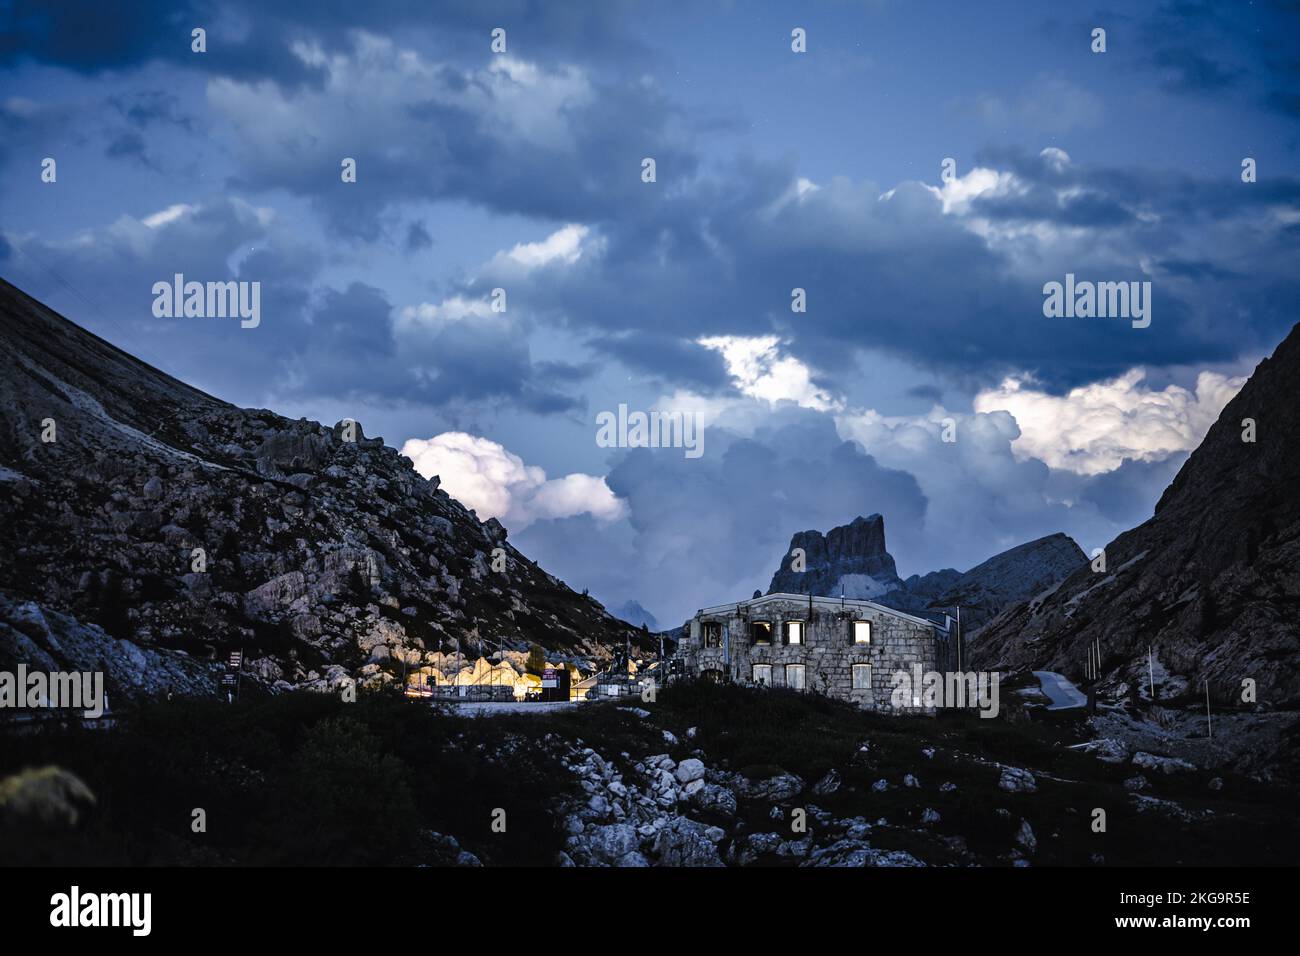 Description: Thunderclouds passing over the Falzarago great war museum in the evening. Falzarego pass, Dolomites, South Tirol, Italy, Europe. Stock Photo